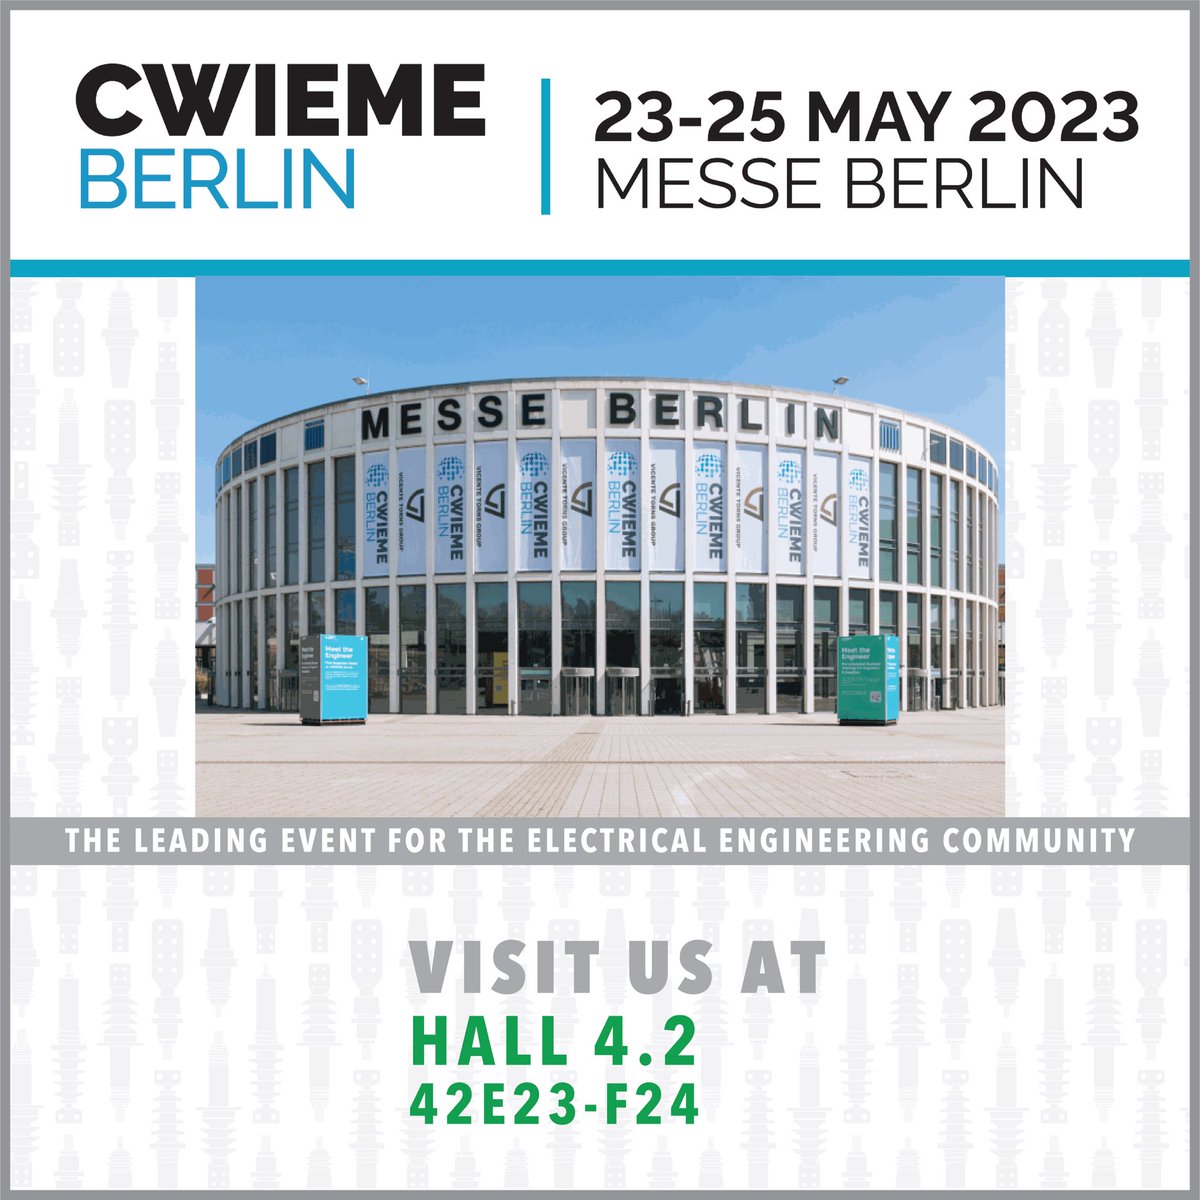 The H-J Family of Companies will be an exhibitor at CWIEME Berlin 2023 on May 23-25! Connect with us while you’re at the show.

We look forward to seeing you at the CWIEME 2023 Show!

lnkd.in/g4C4dRcj

lnkd.in/gY33m9kt

#hjfamily #tradeshow #solutionsprovider